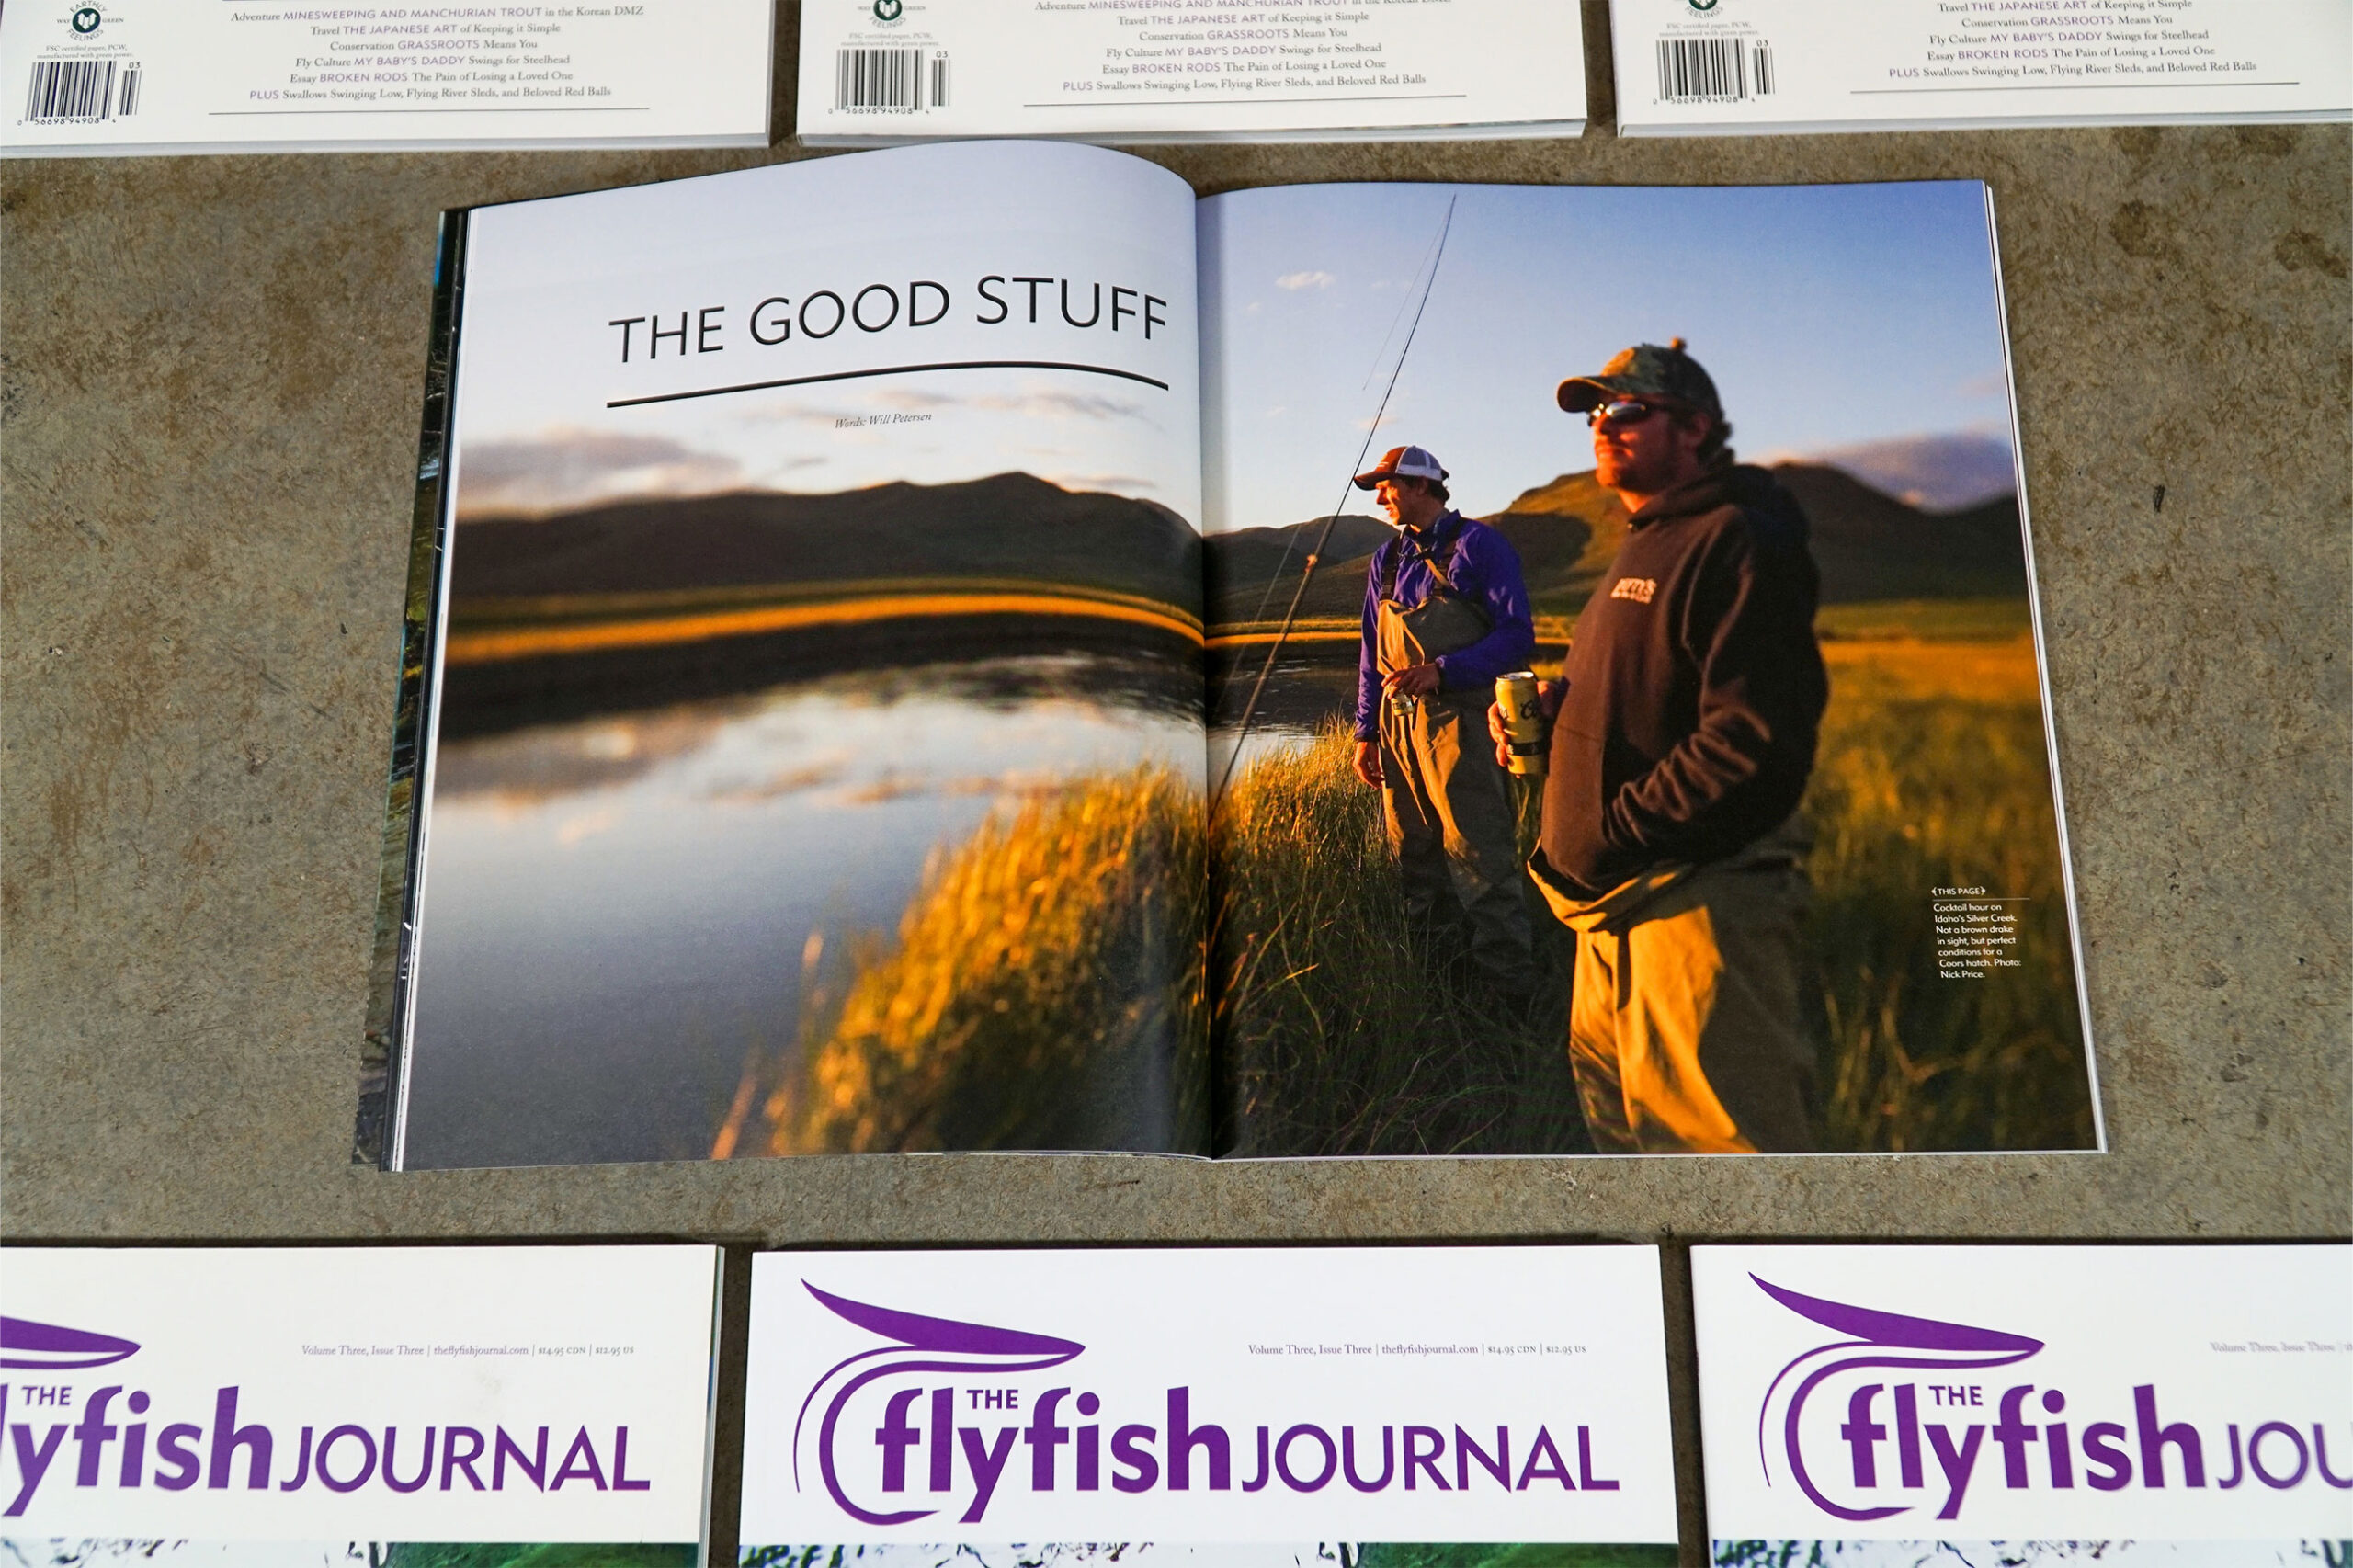 The Flyfish Journal Volume 3 Issue 3 Feature The Good Stuff